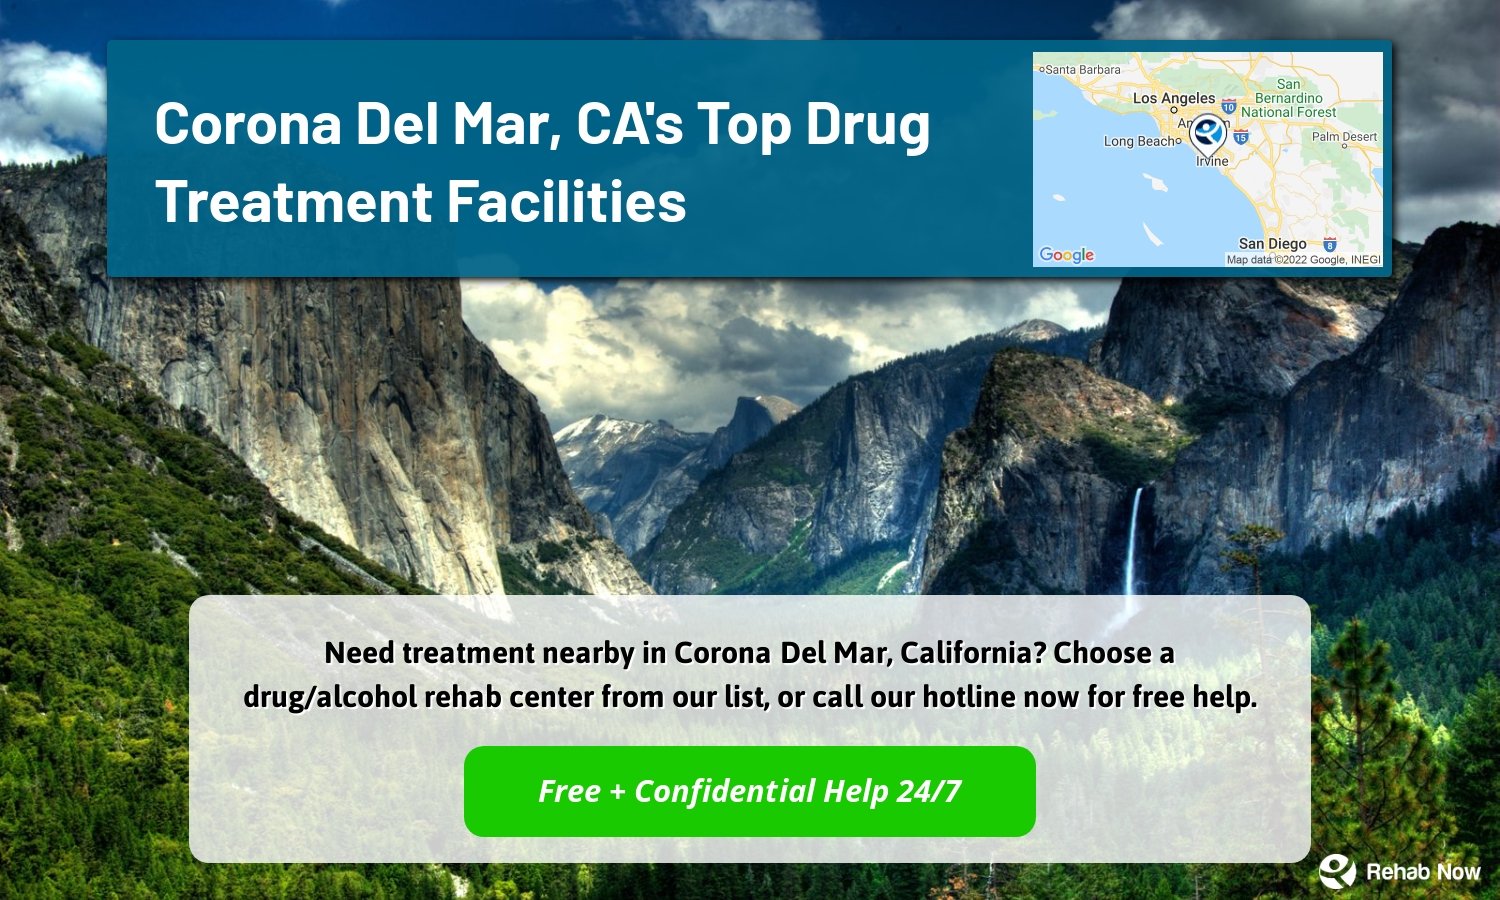 Need treatment nearby in Corona Del Mar, California? Choose a drug/alcohol rehab center from our list, or call our hotline now for free help.